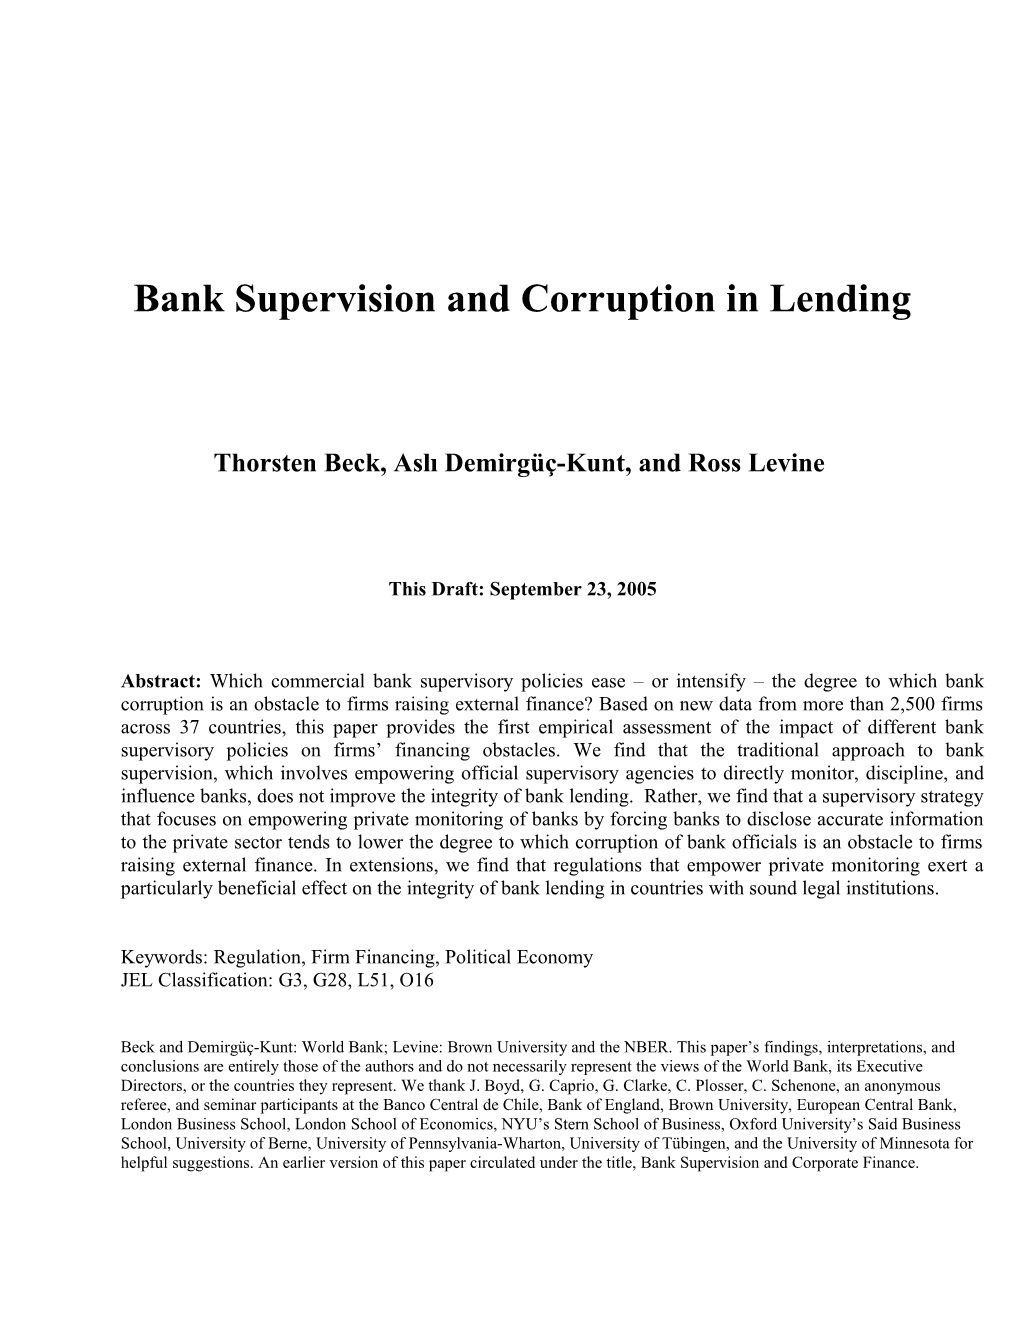 Bank Supervision and Corruption in Lending